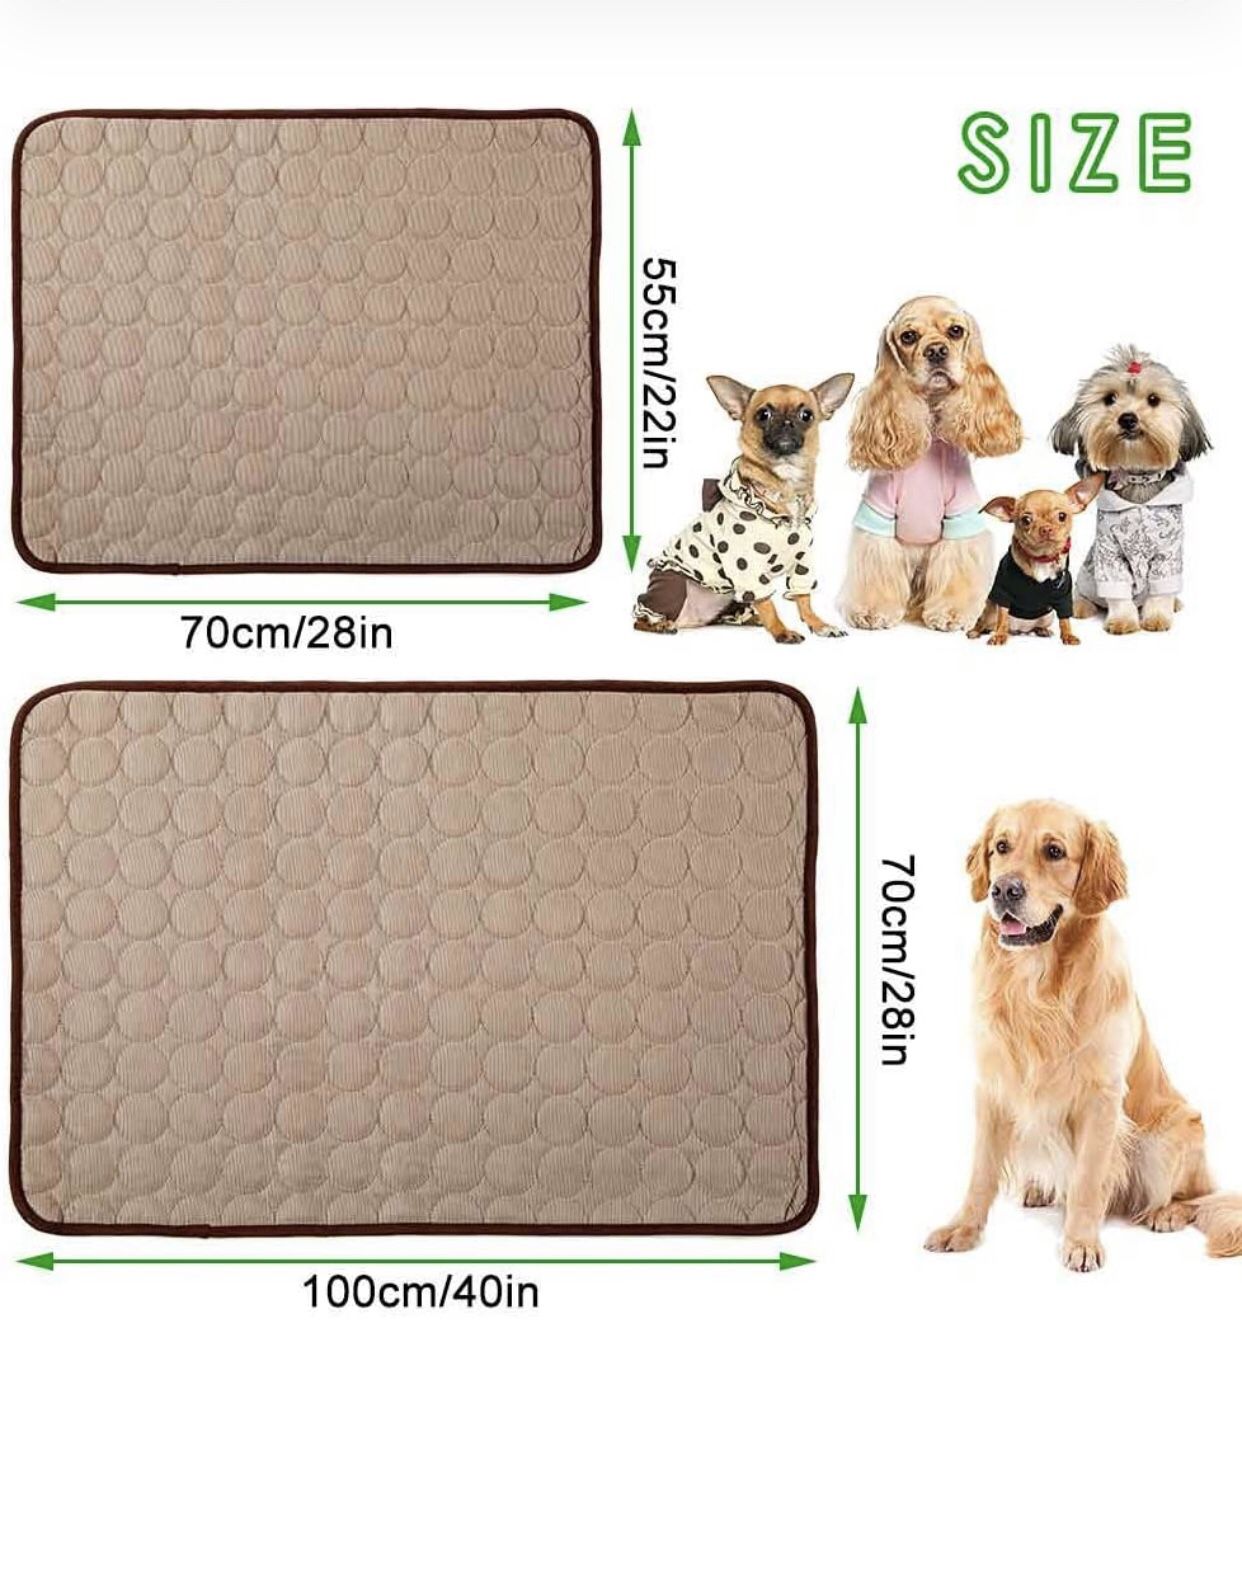 Jaaytct Cooling Mat for Dogs Cats Ice Silk Pet Self Cooling Pad Blanket for Pet Beds/Kennels/Couches /Car Seats/Floors Size XL